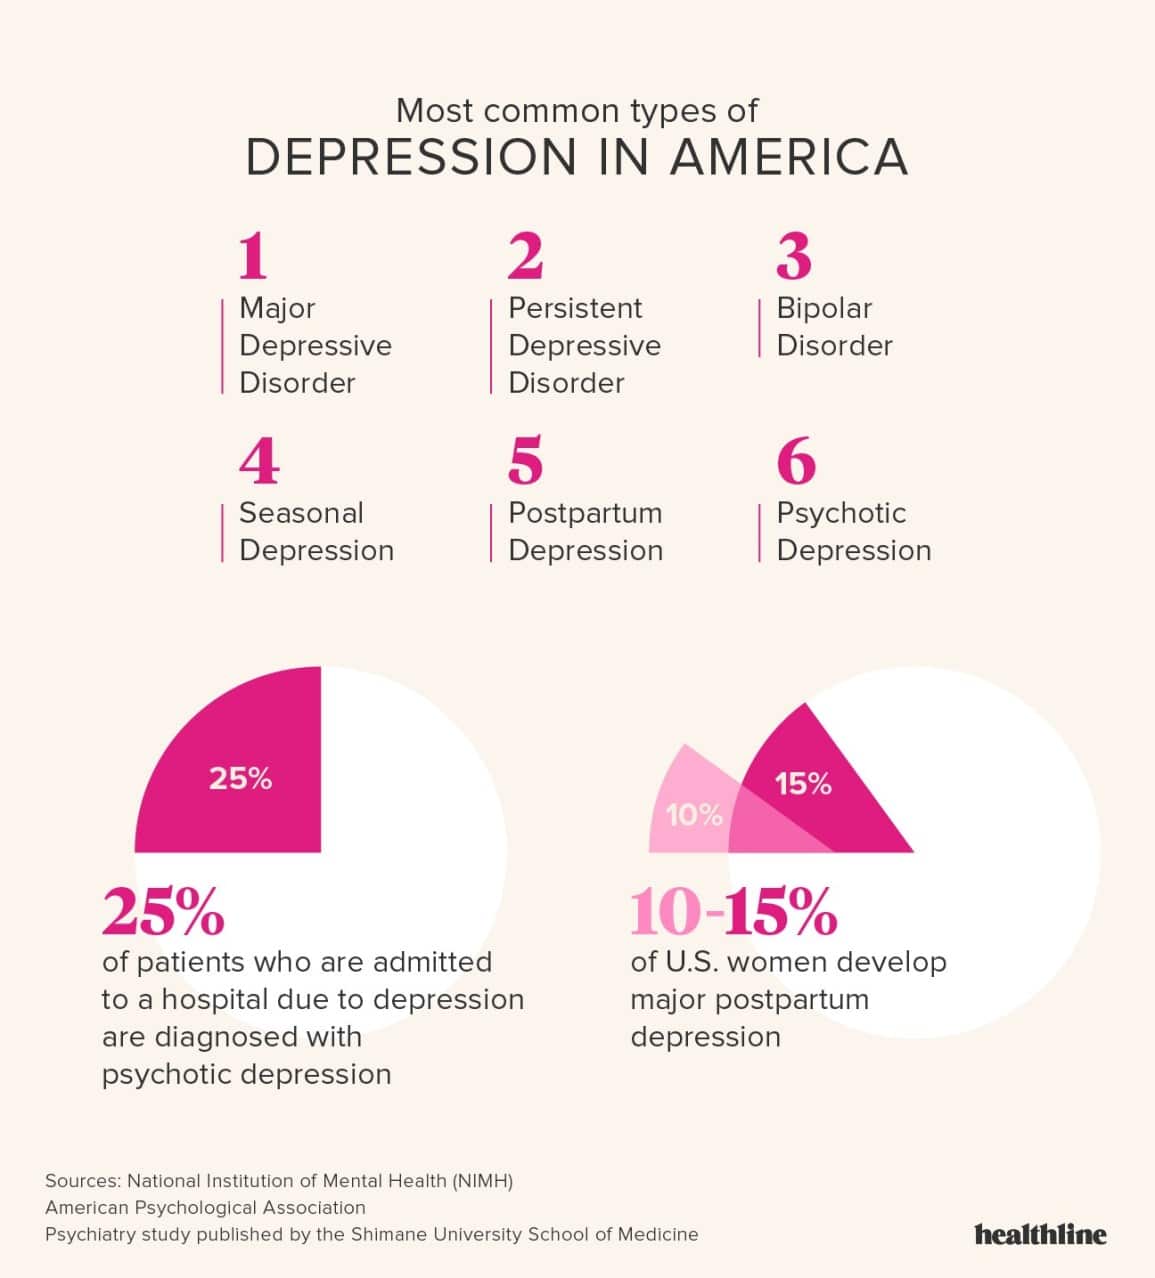 A Factual Cure For Those Who Suffer From Depression And Anxiety